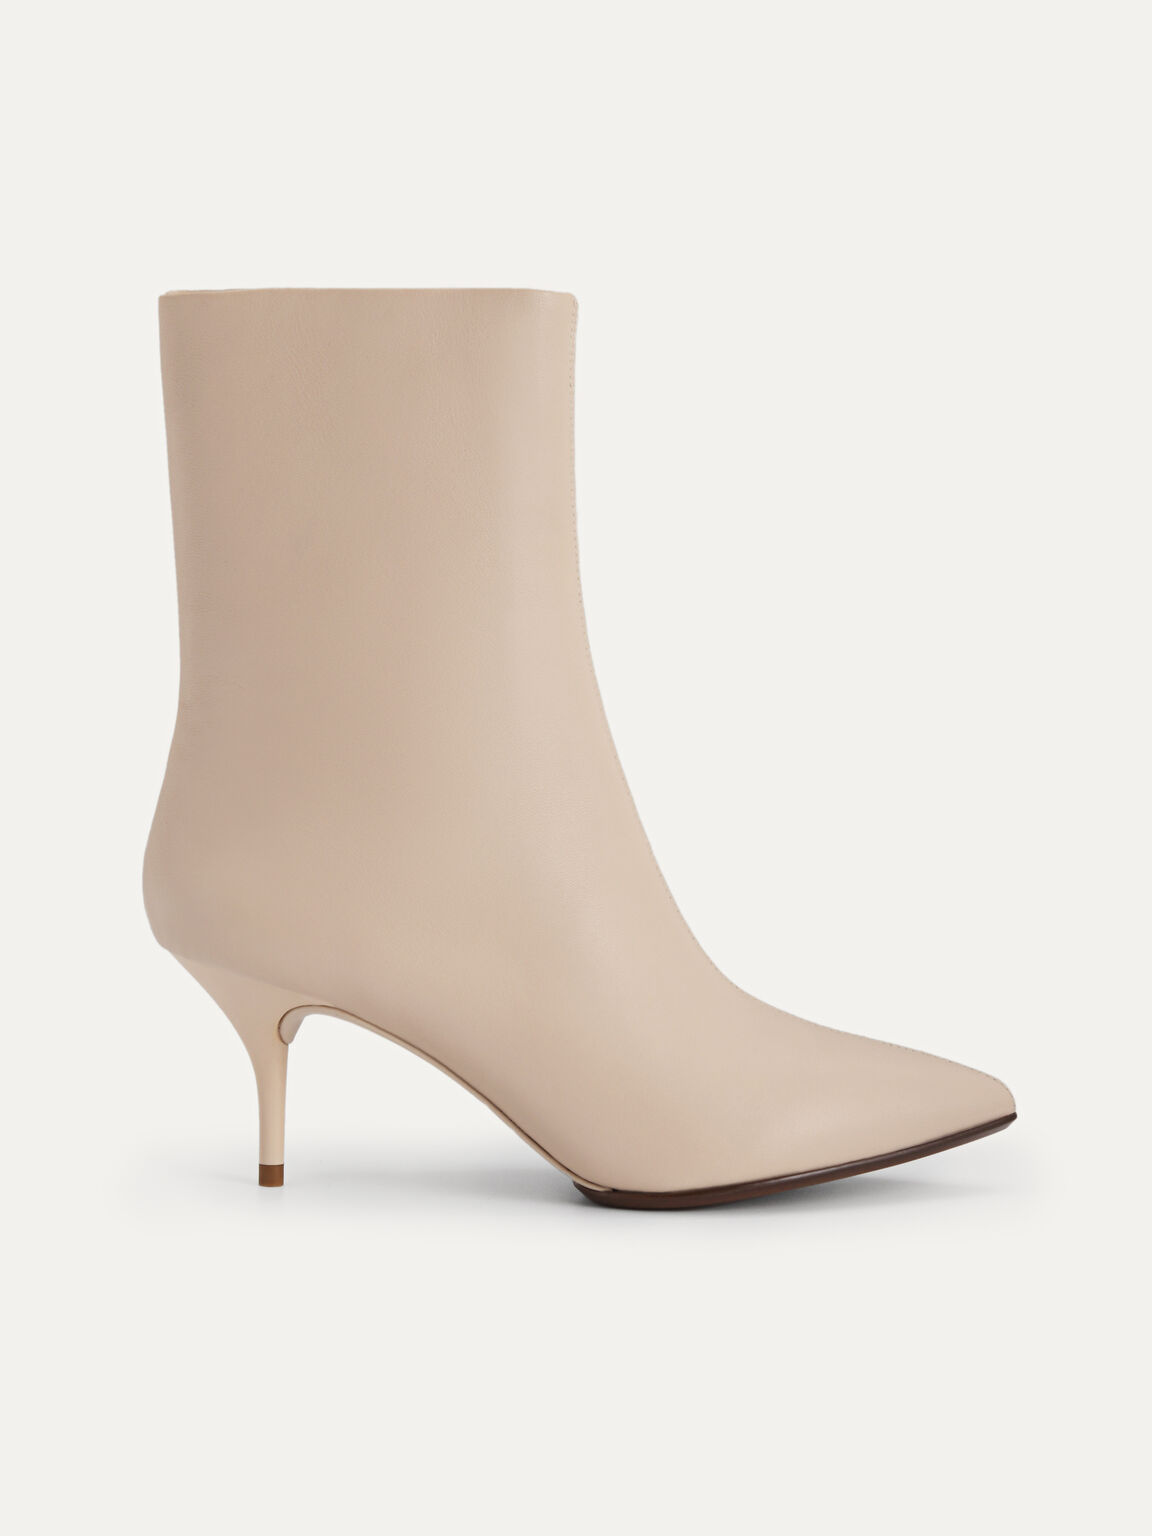 Leather Ankle Boots, Beige, hi-res